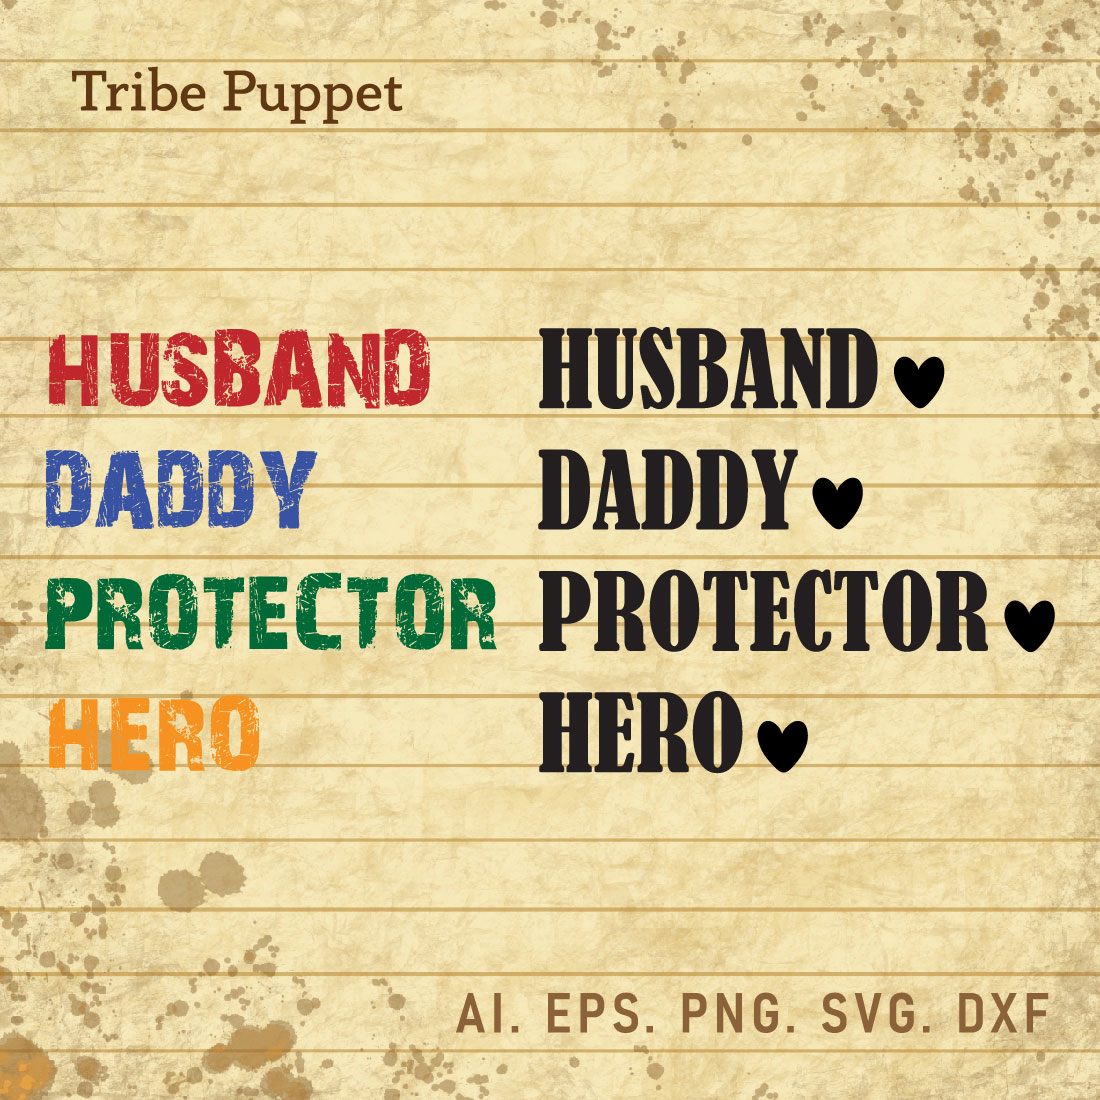 Husband Daddy Protector Hero cover image.